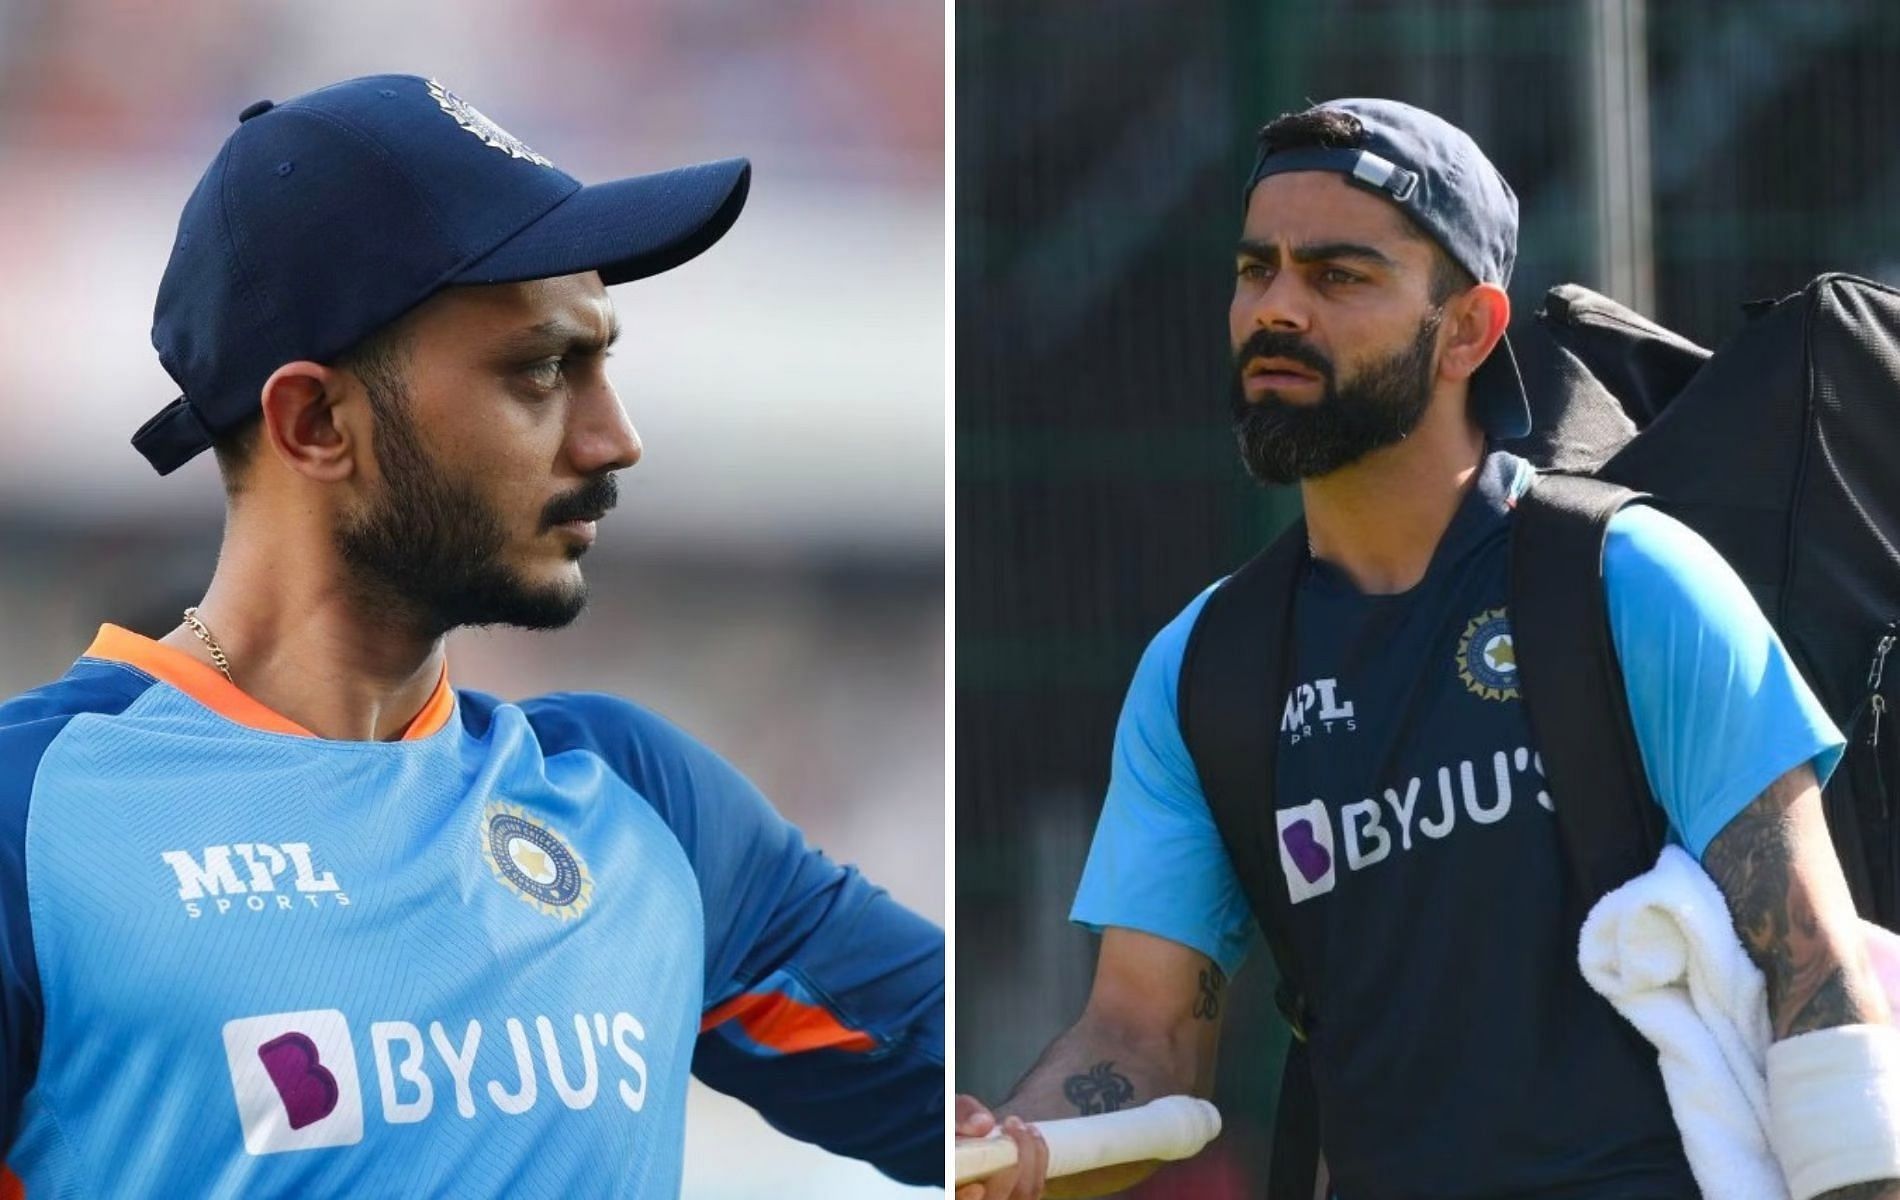 Axar Patel was promoted ahead of Virat Kohli in the batting order. [P/C: Getty]